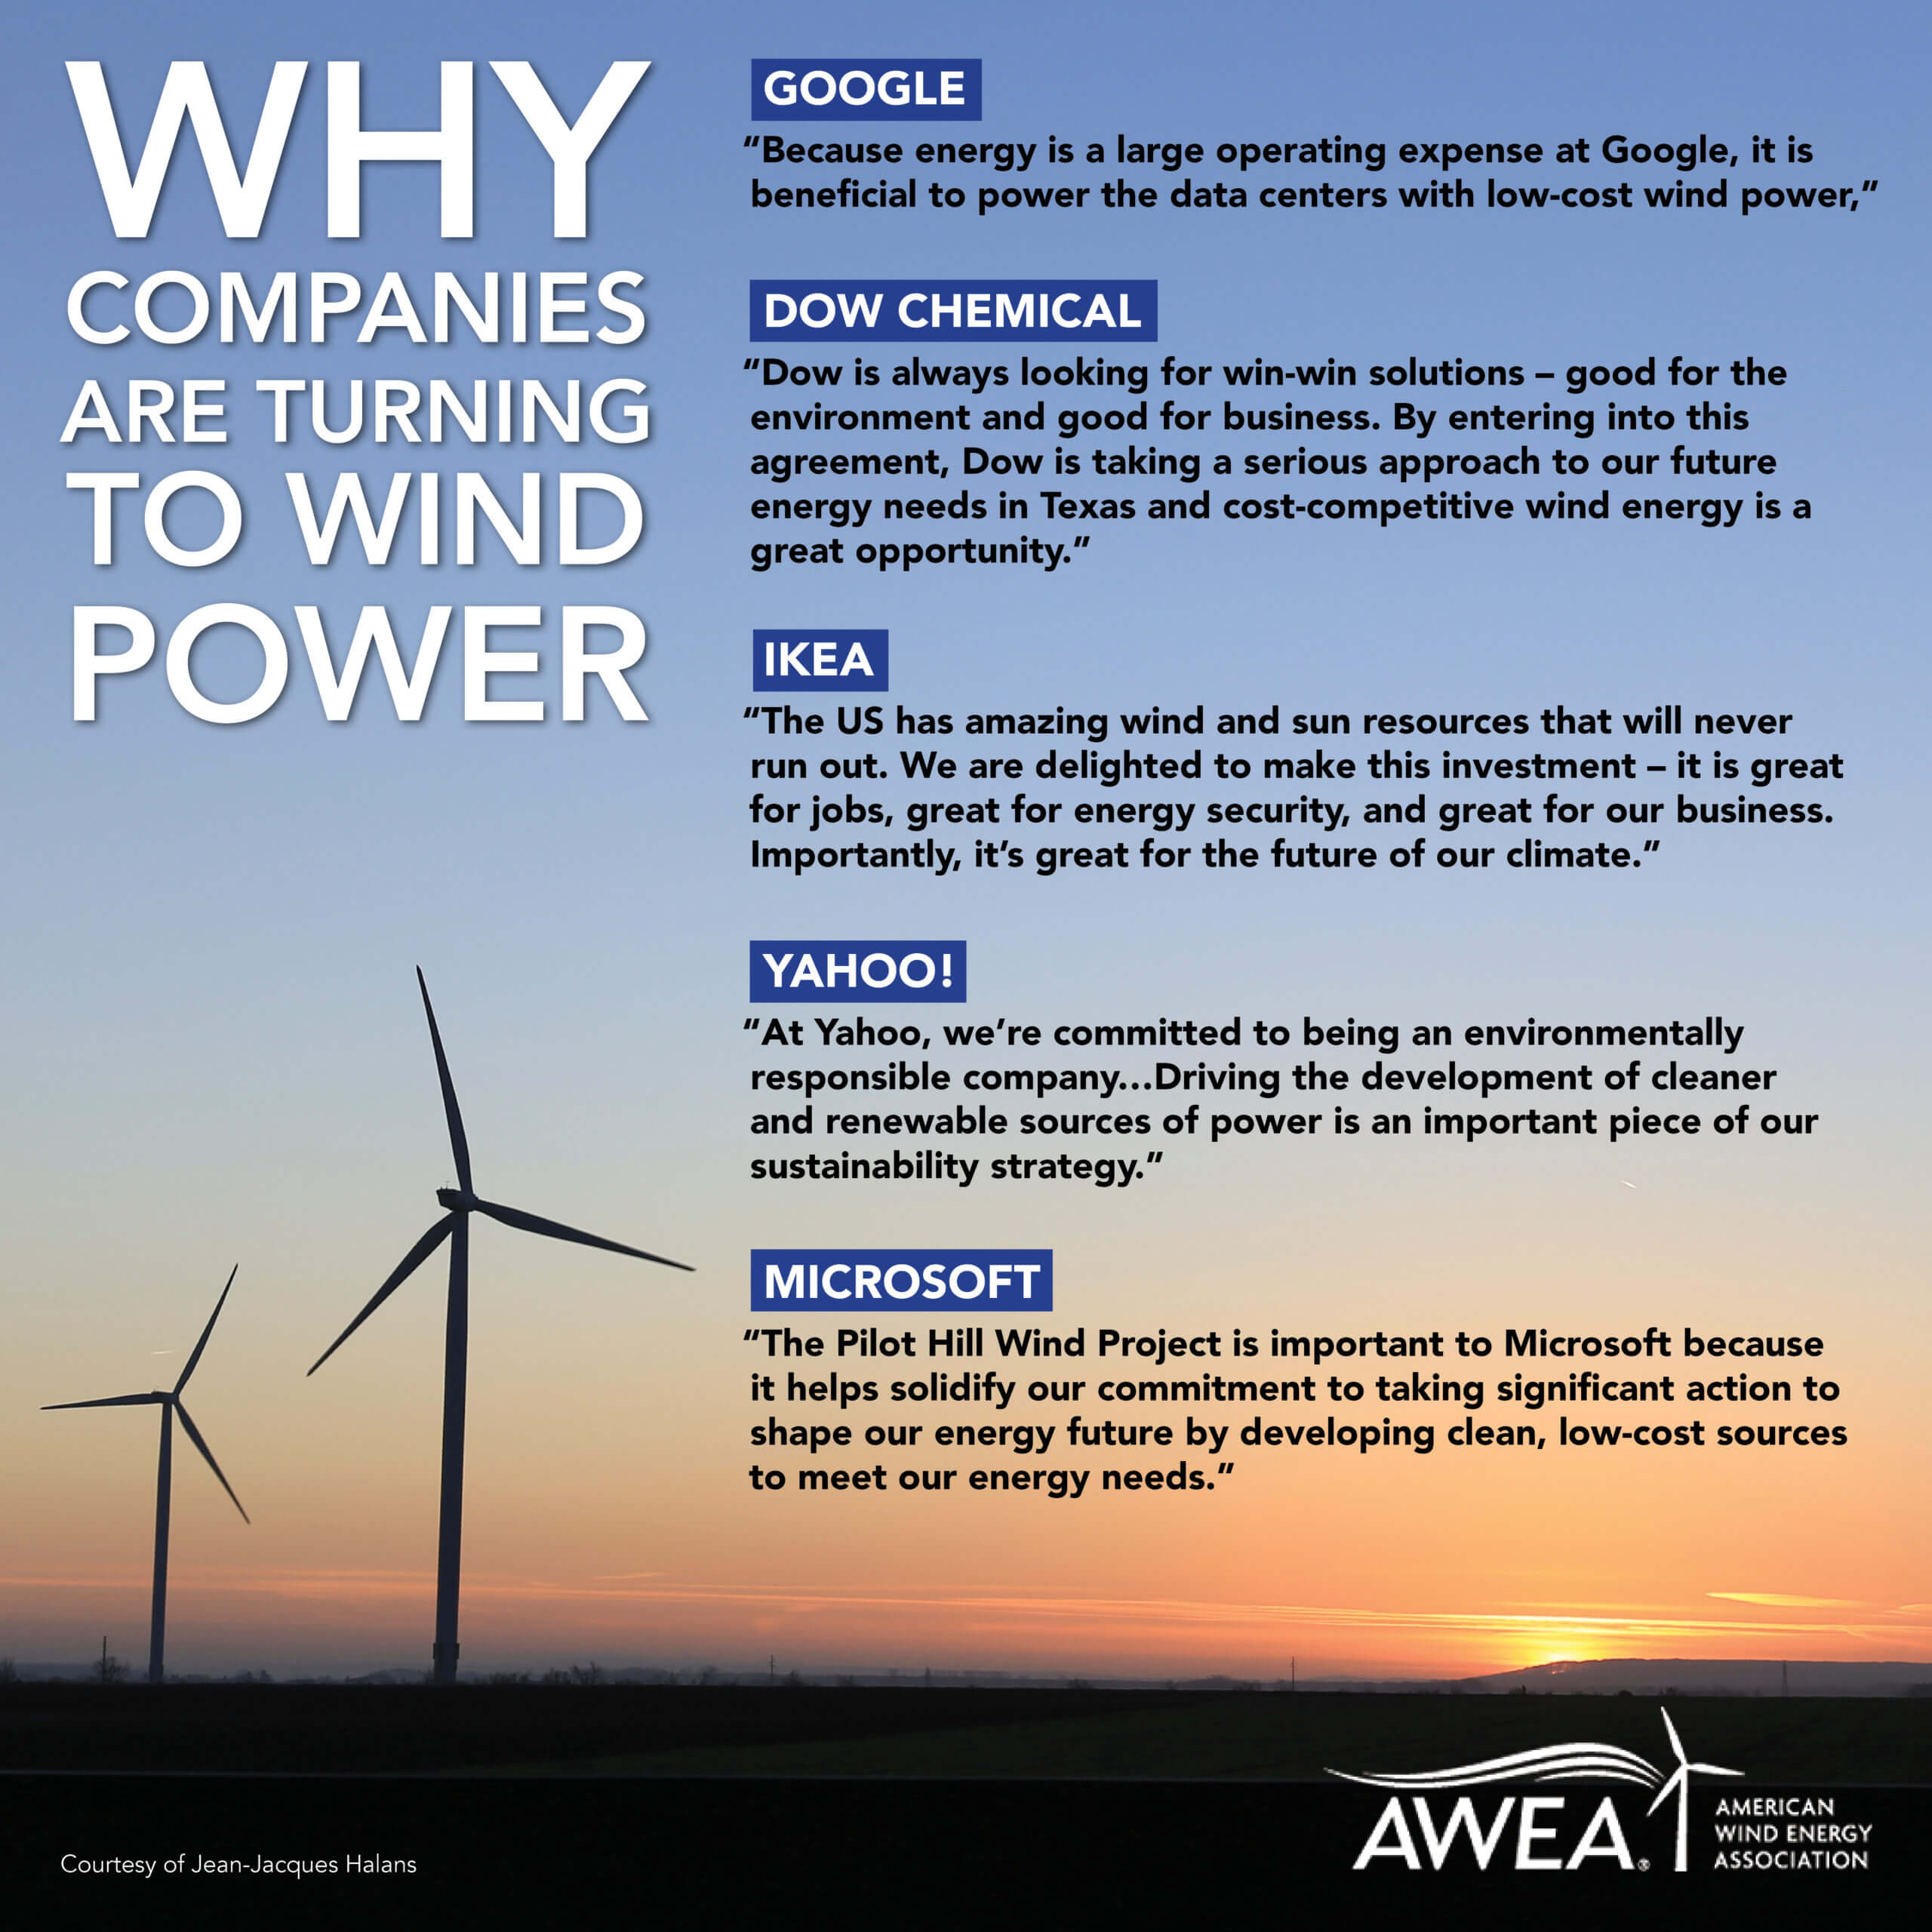 Wind energy facts, advantages, and disadvantages - Caltech Science